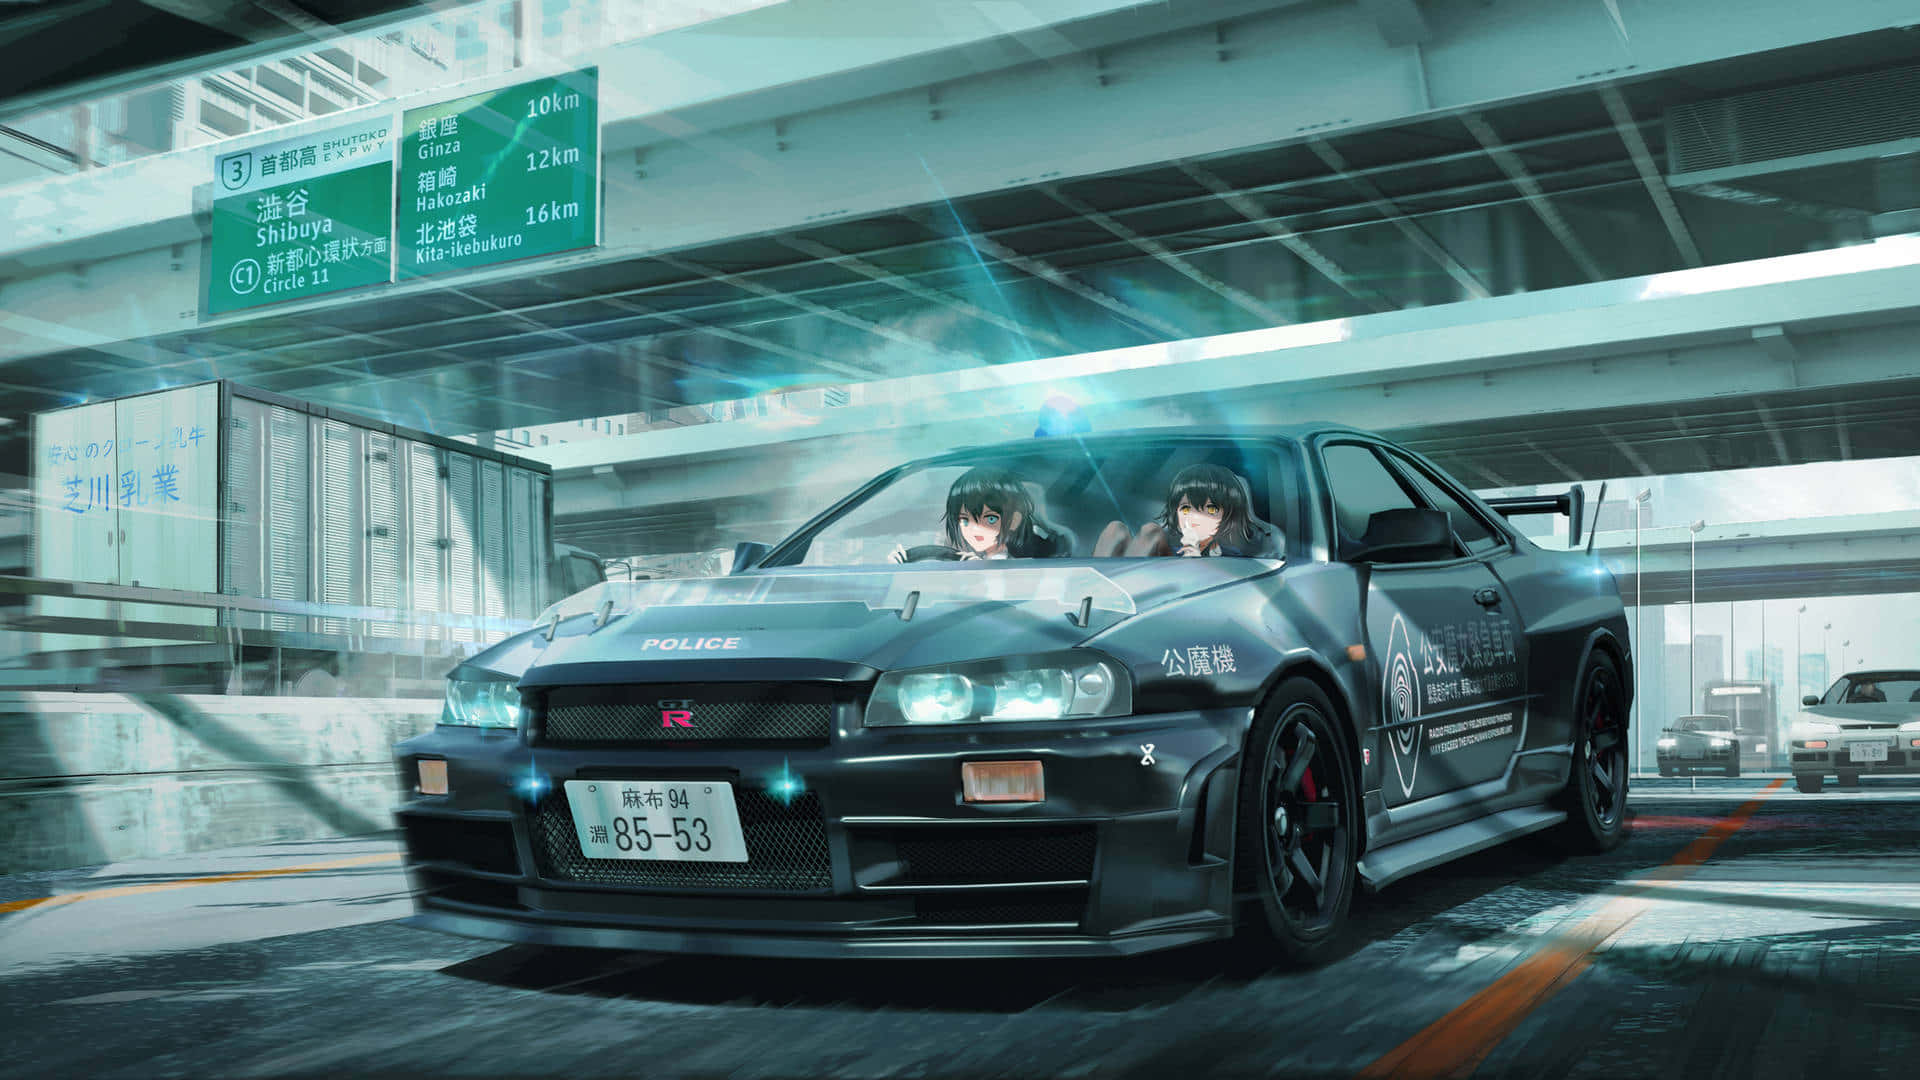 Download Unstoppable Power - An Anime Car